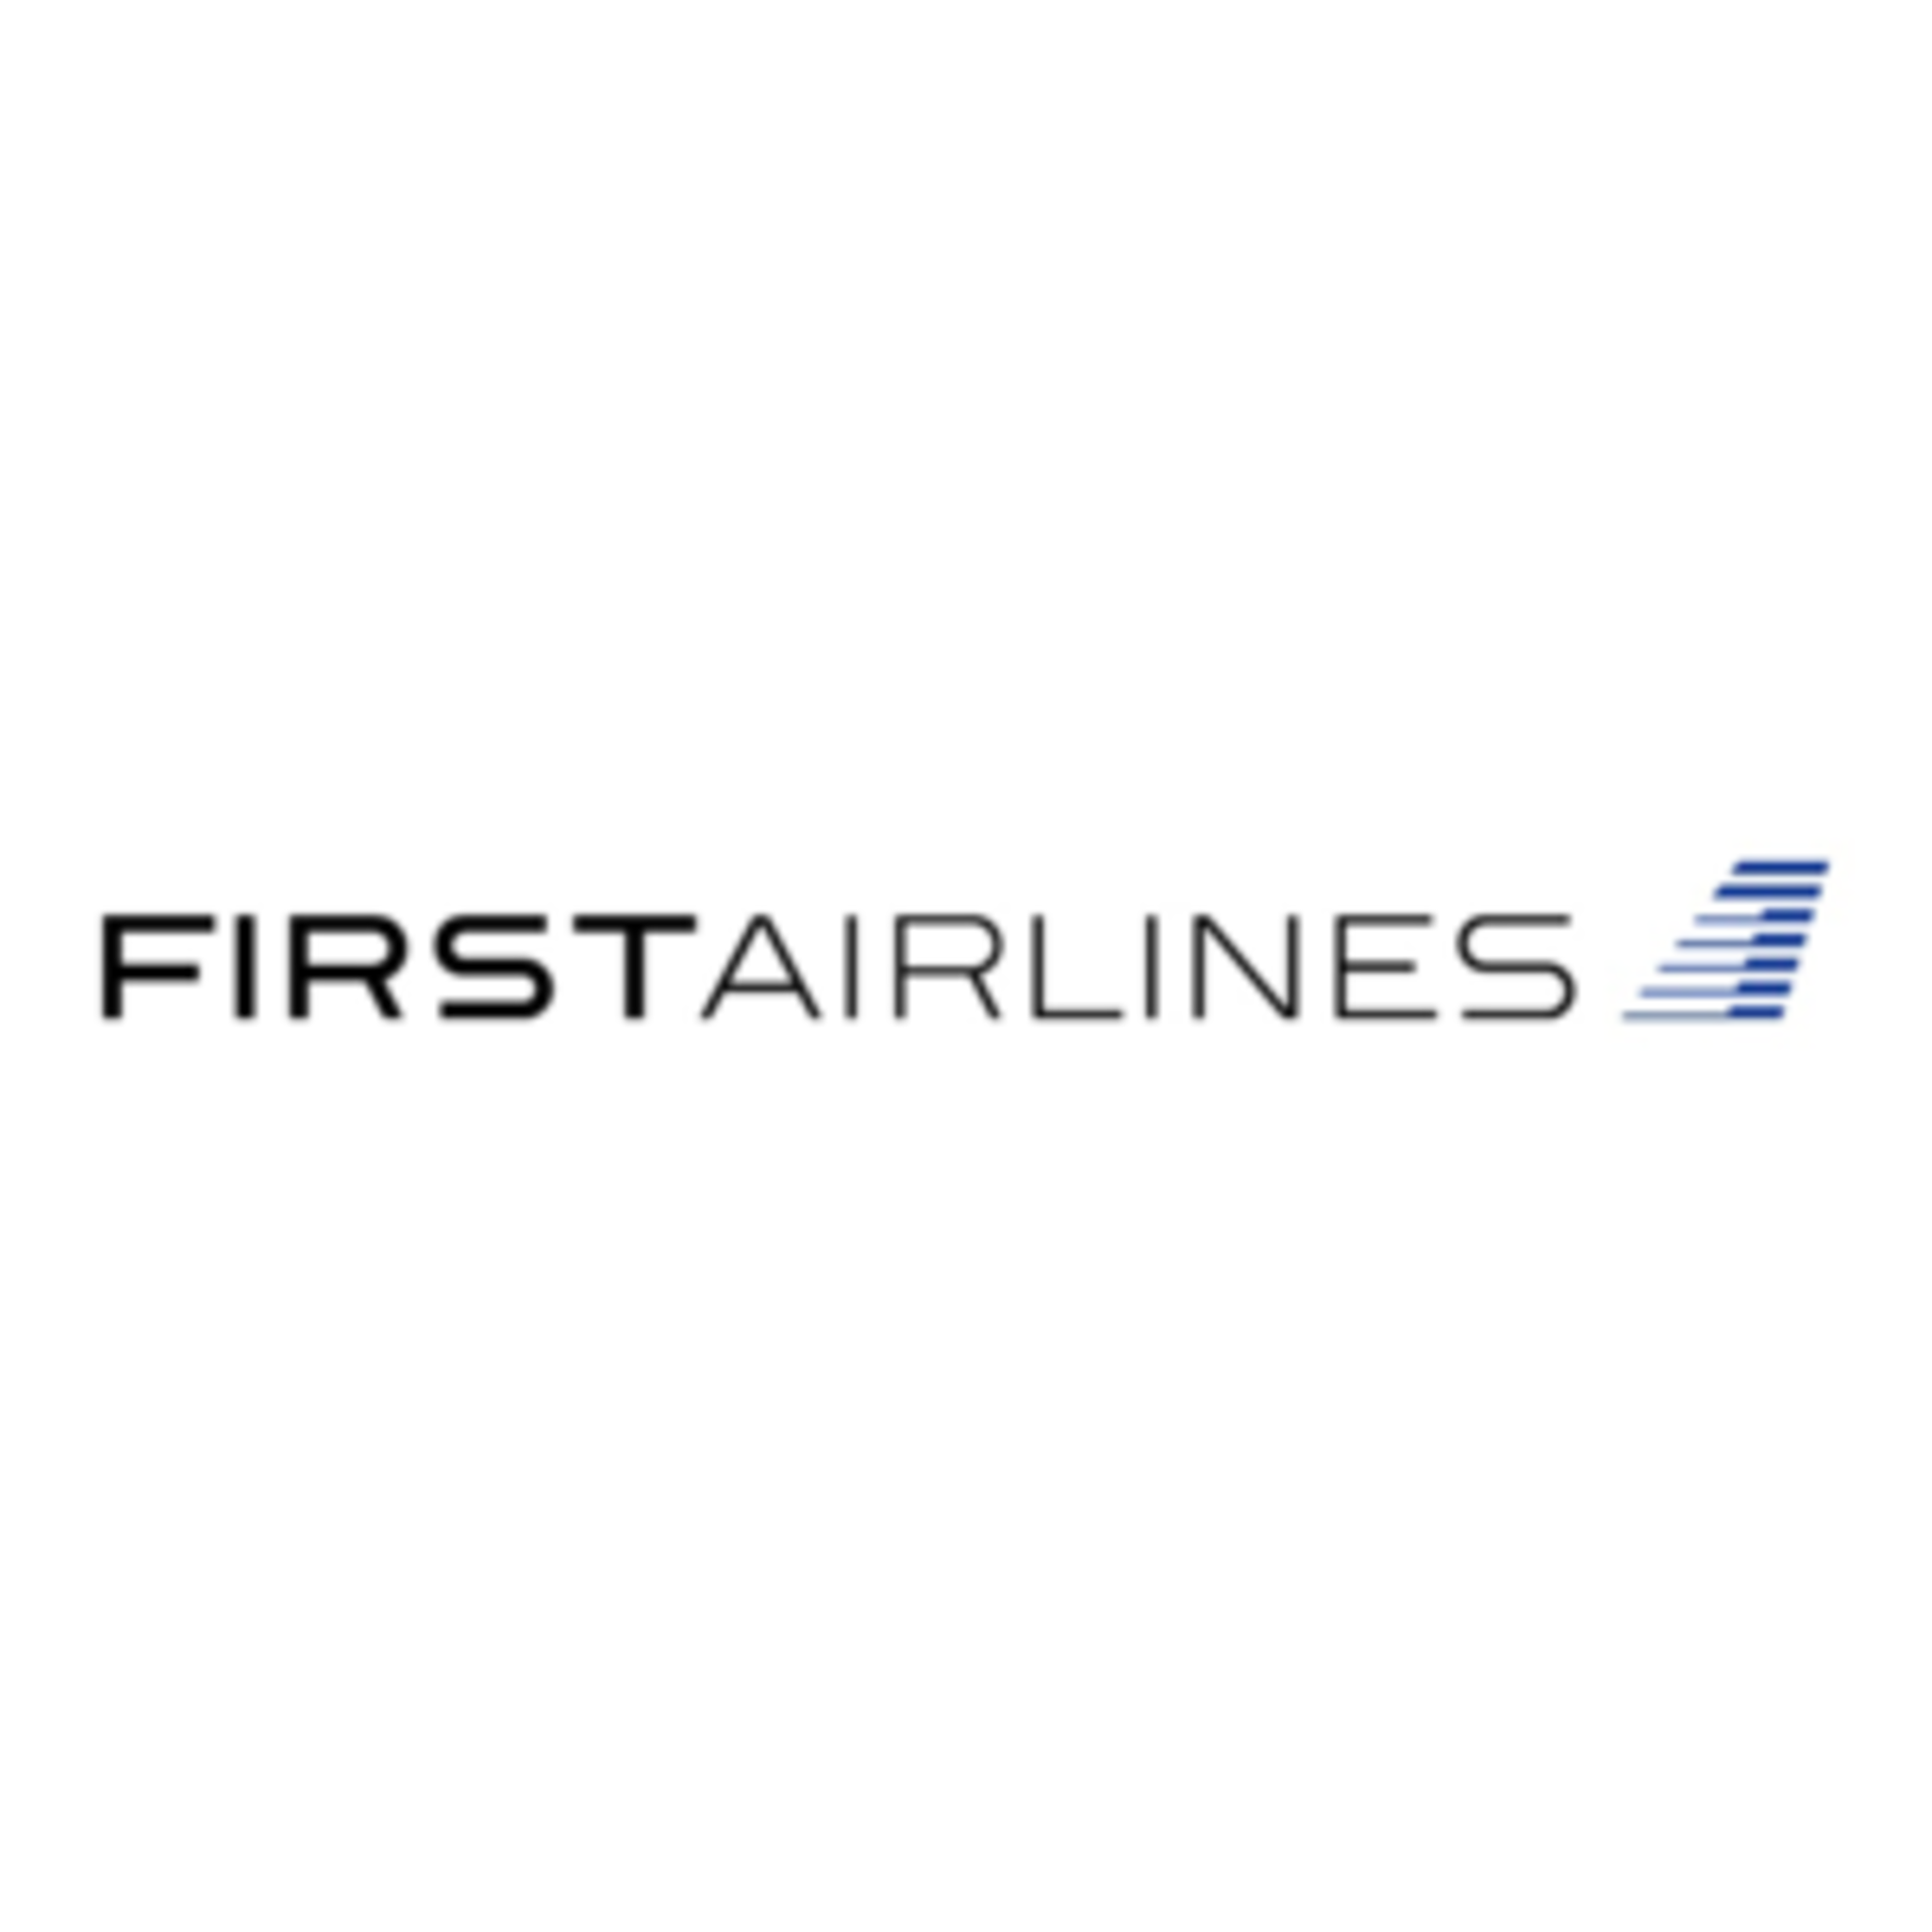 FIRST AIRLINESの代表写真5